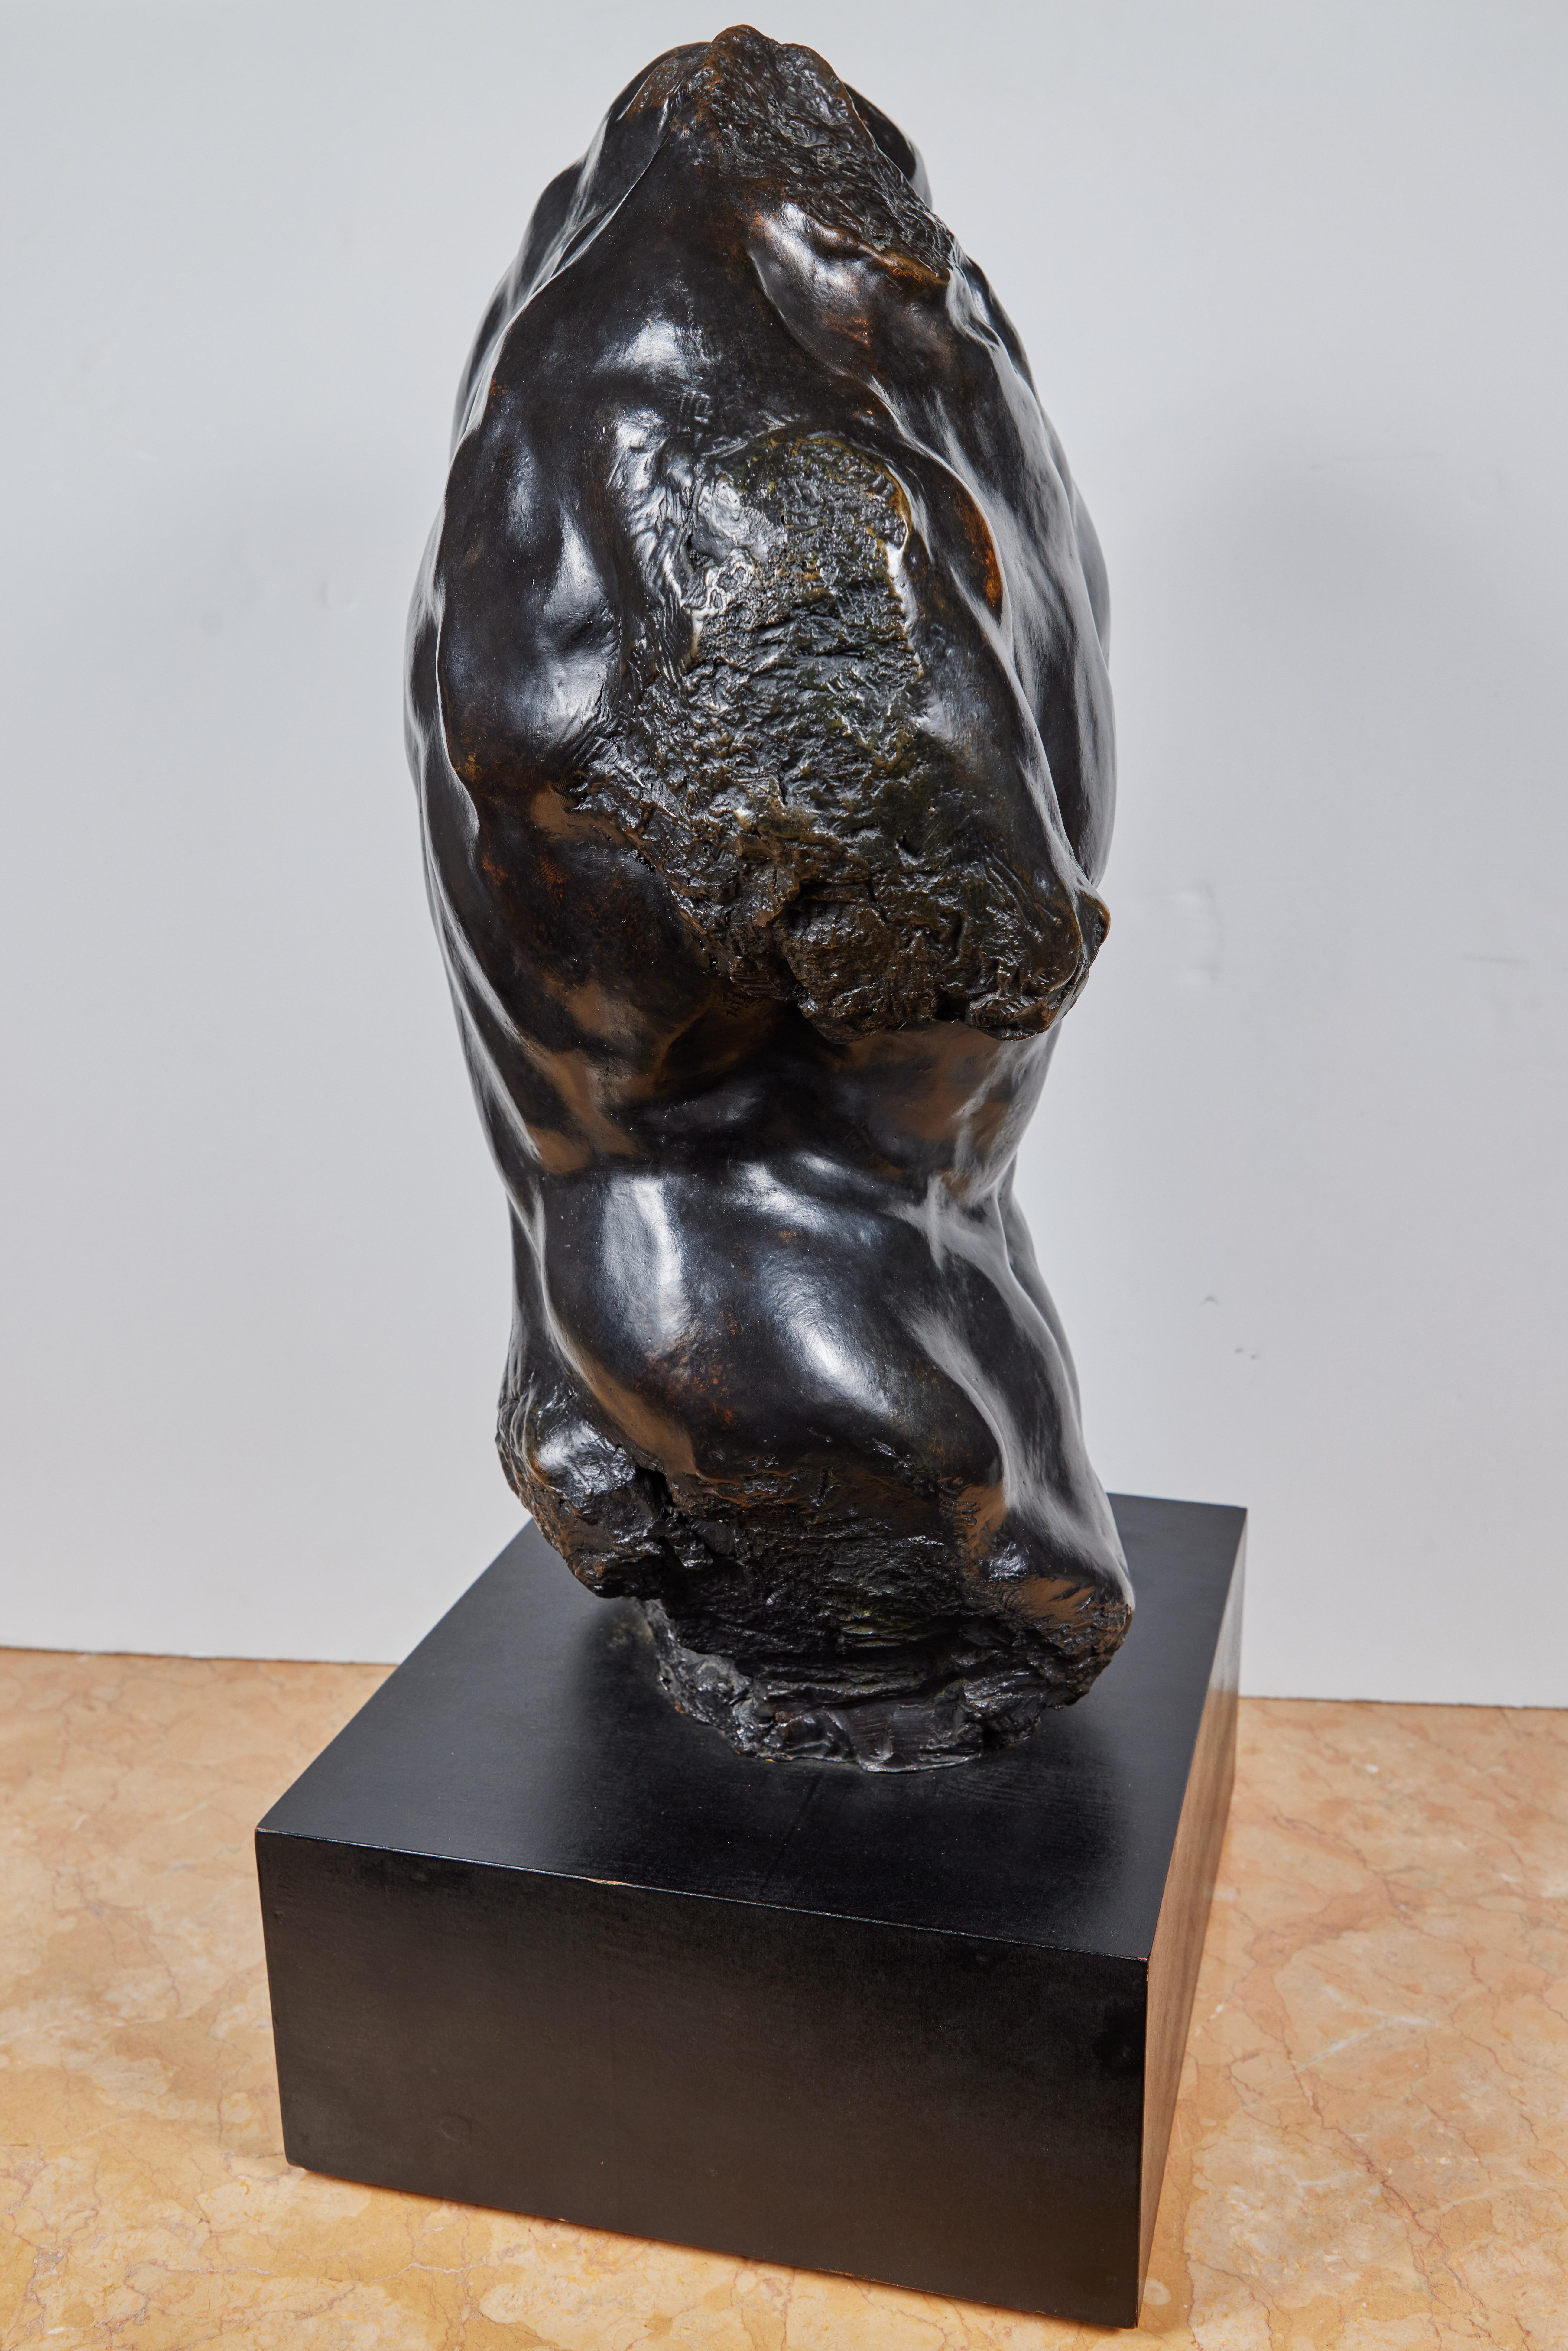 A solid, patinated cast bronze sculpture of a male torso in motion, Bias, by listed, award winning American artist, Gary Weisman (b. 1952). Bronze: 23